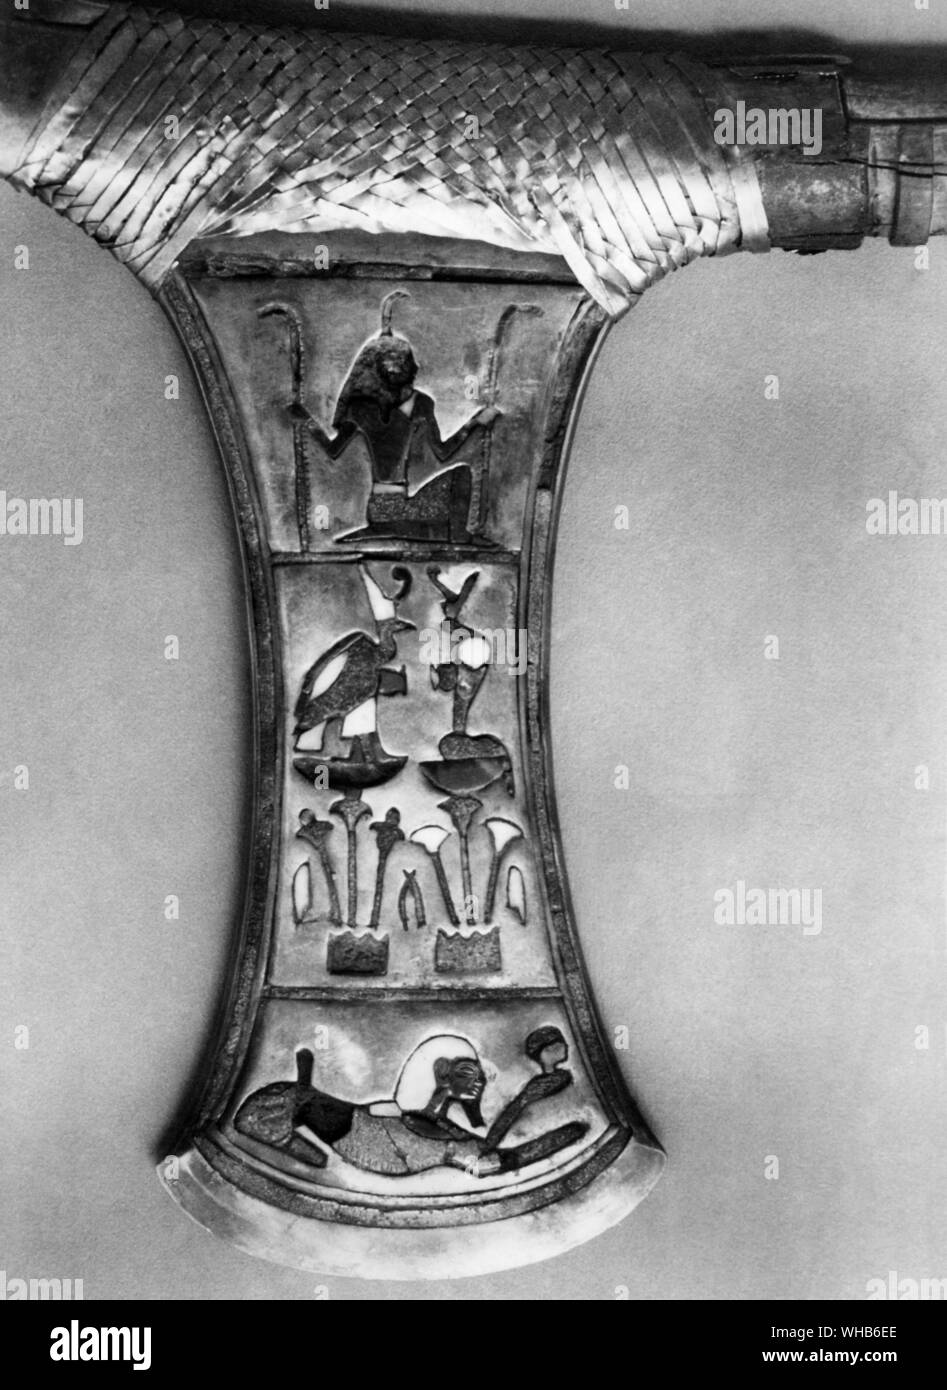 Ceremonial Battle-axe of Amosis I New Kingdom XVIII dynasty 1570-1545 BC - Ahmose I was a pharaoh of ancient Egypt and the founder of the Eighteenth dynasty.. Stock Photo